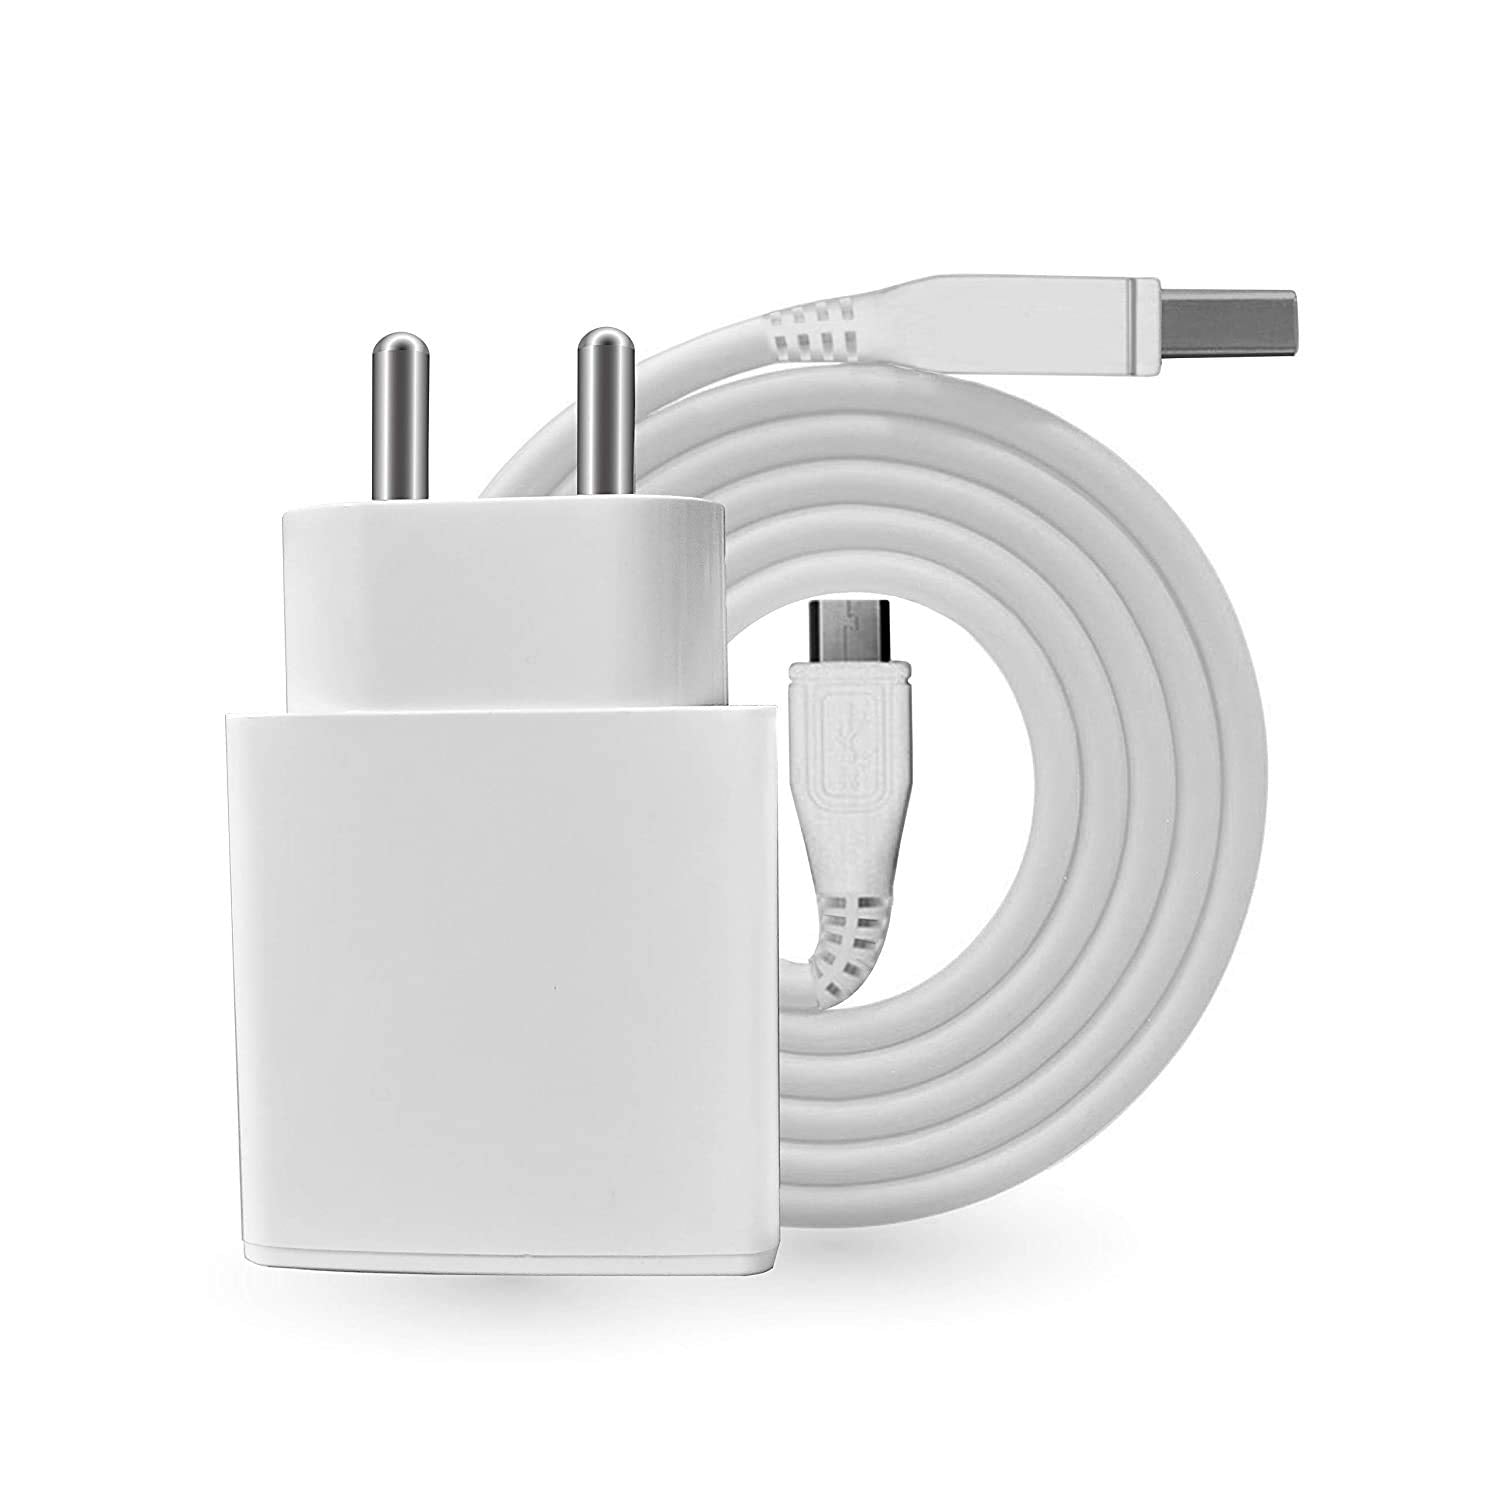 VIVO Y21L 2 Amp Fast Mobile Charger with Cable